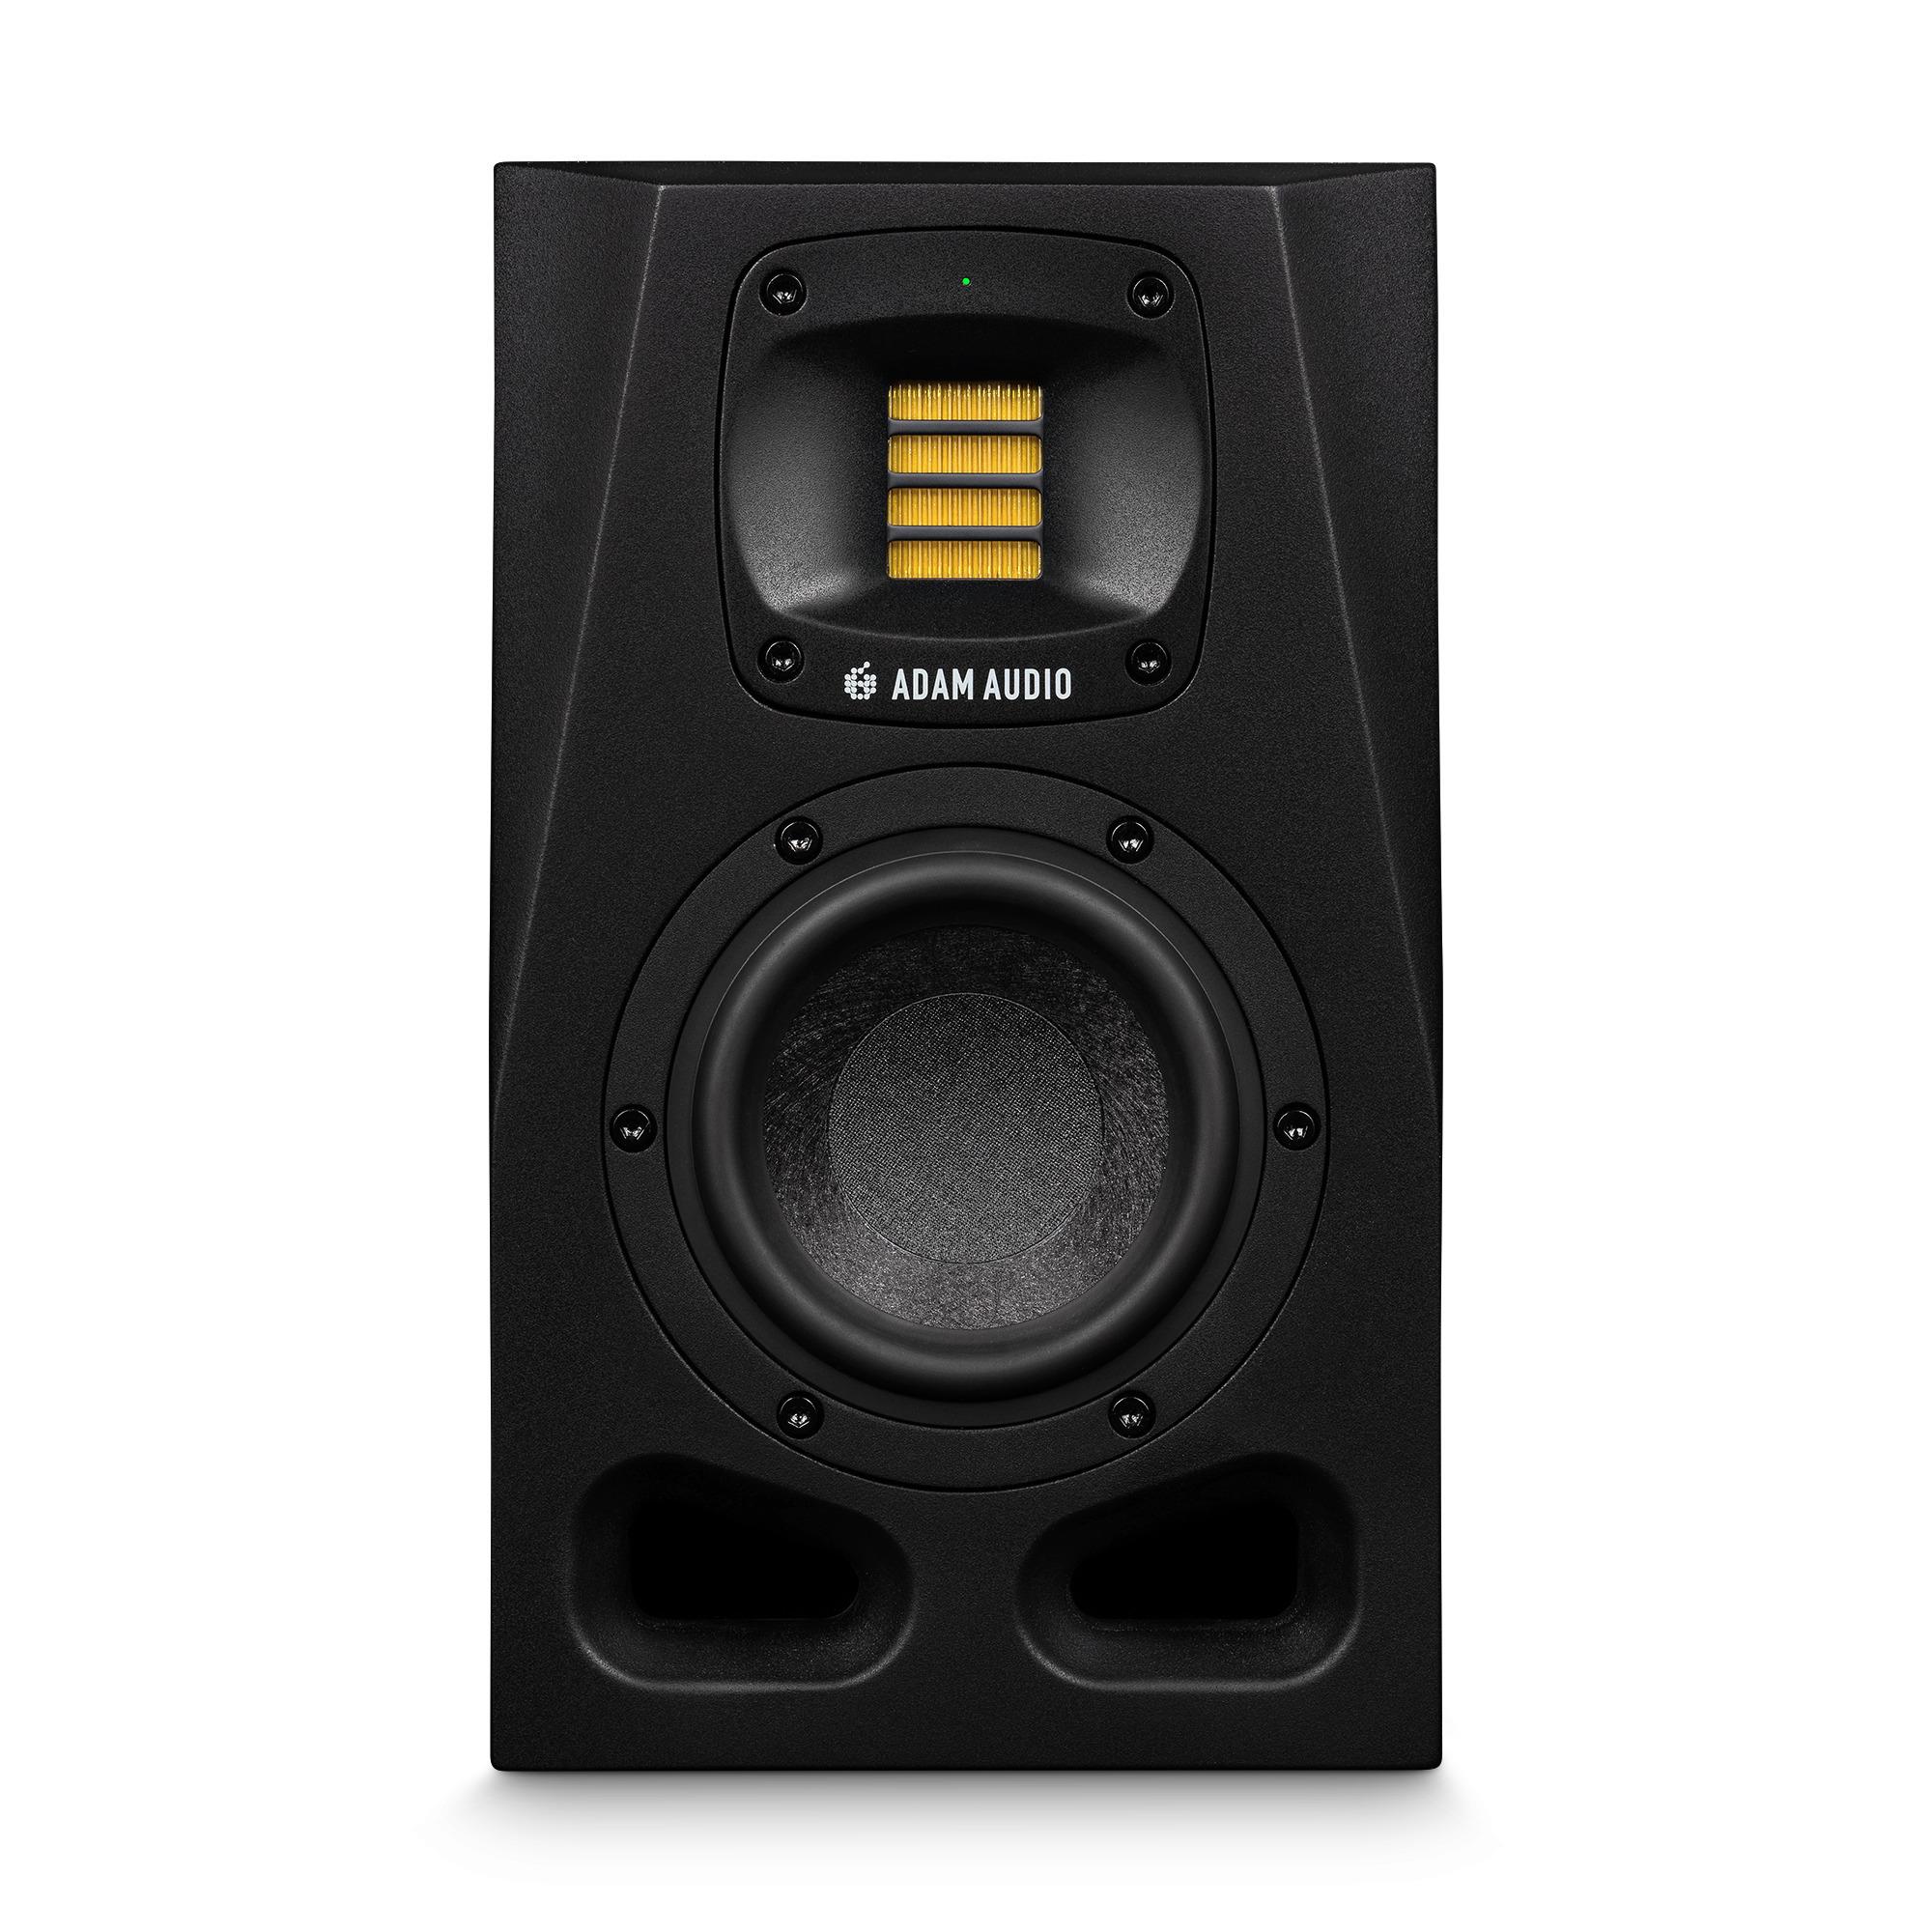 Adam Audio A4V Powered Two-Way Studio Monitor (2-Pack) Bundle - image 5 of 9